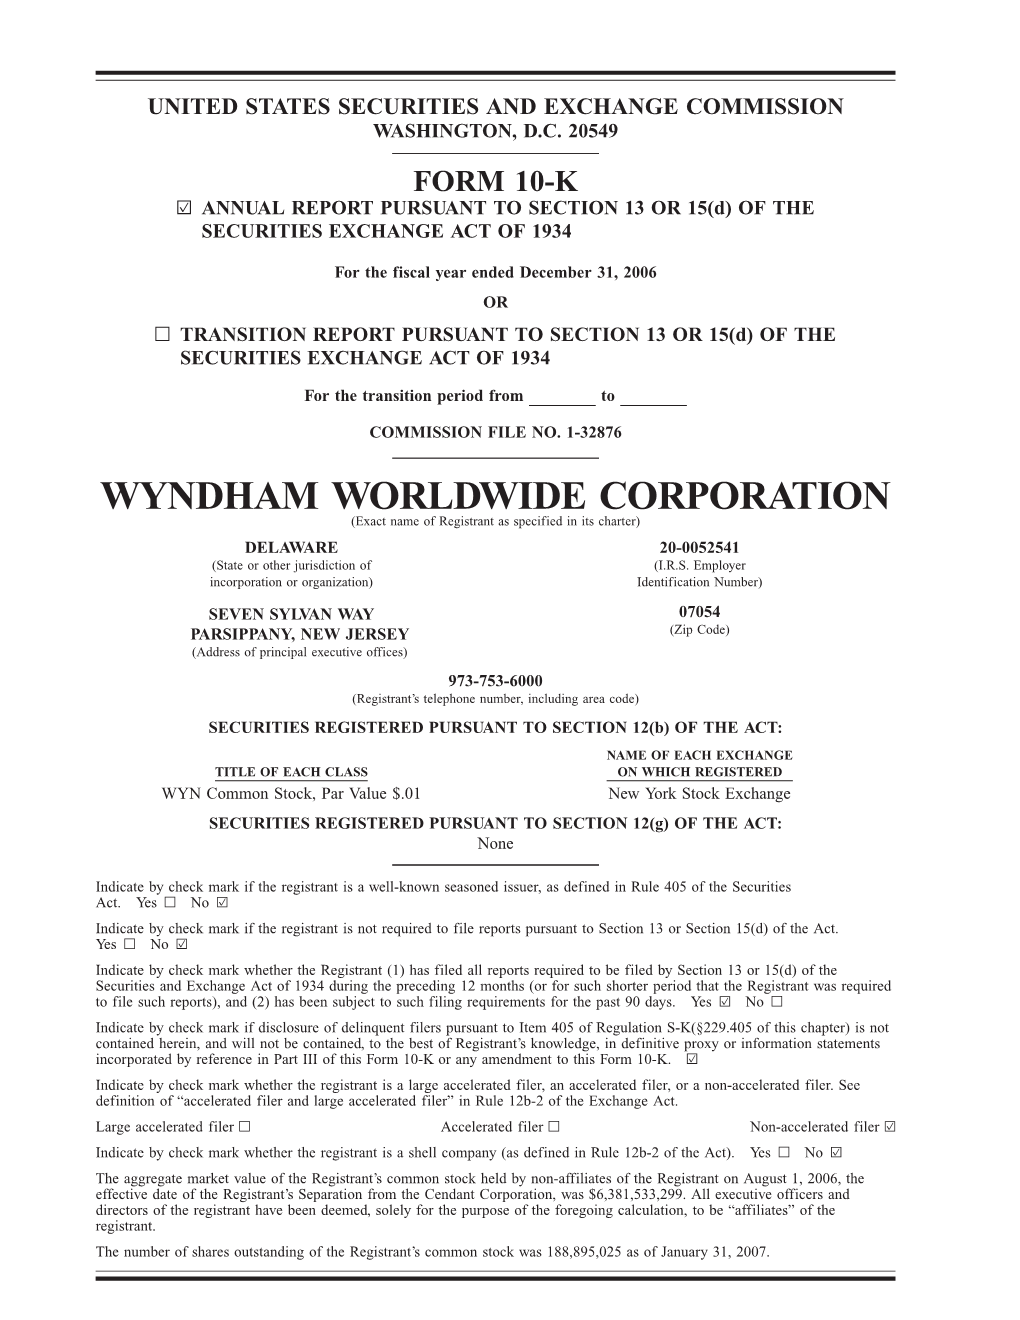 WYNDHAM WORLDWIDE CORPORATION (Exact Name of Registrant As Specified in Its Charter) DELAWARE 20-0052541 (State Or Other Jurisdiction of (I.R.S